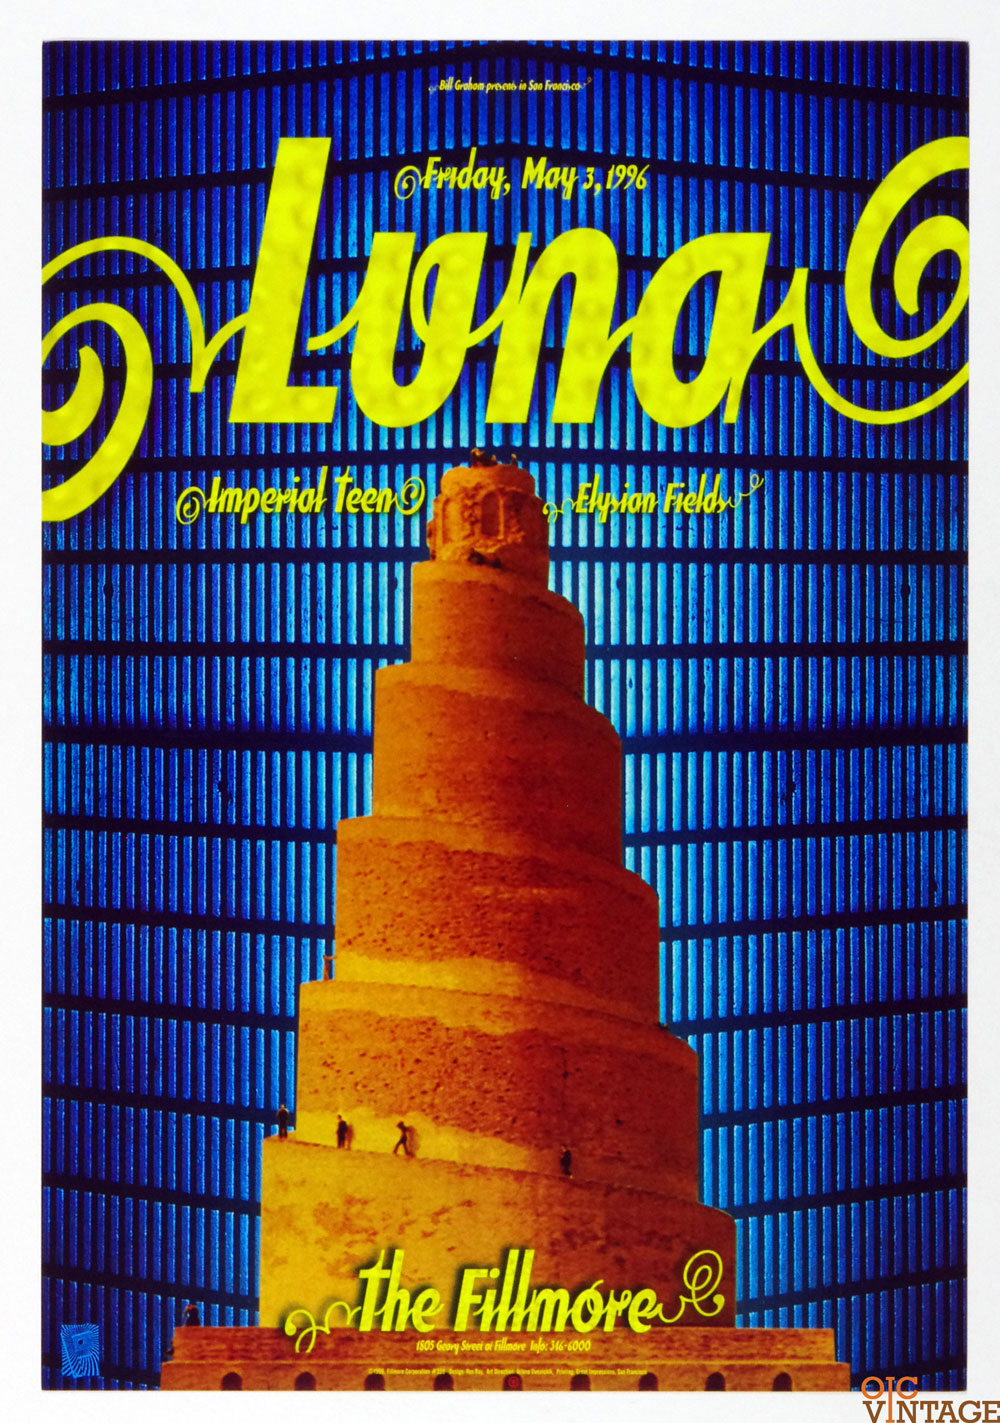 Luna Poster w/ Imperial Teen Elysian Fields 1996 May 3 New Fillmore San Francisco